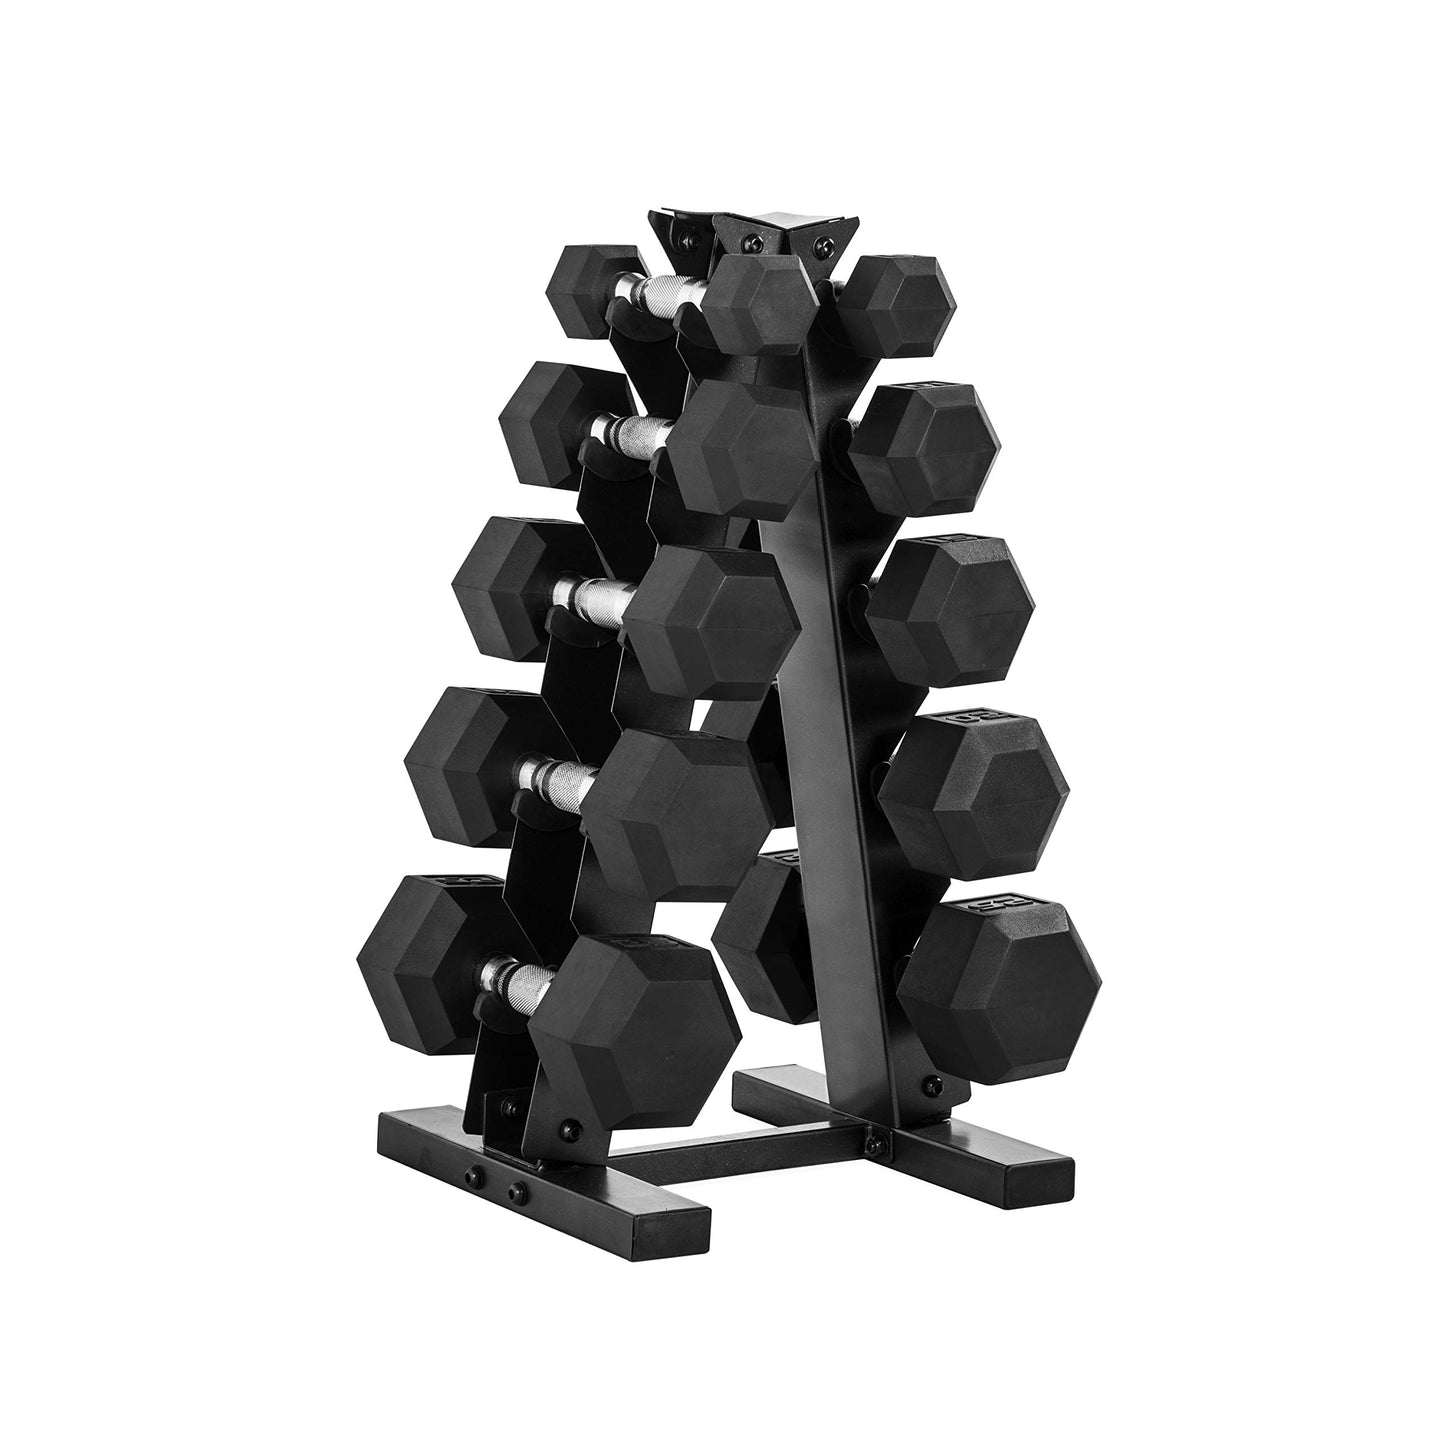 150 LB Dumbbell Weight Set and Storage Rack - ONE RUN SPORTS LLC